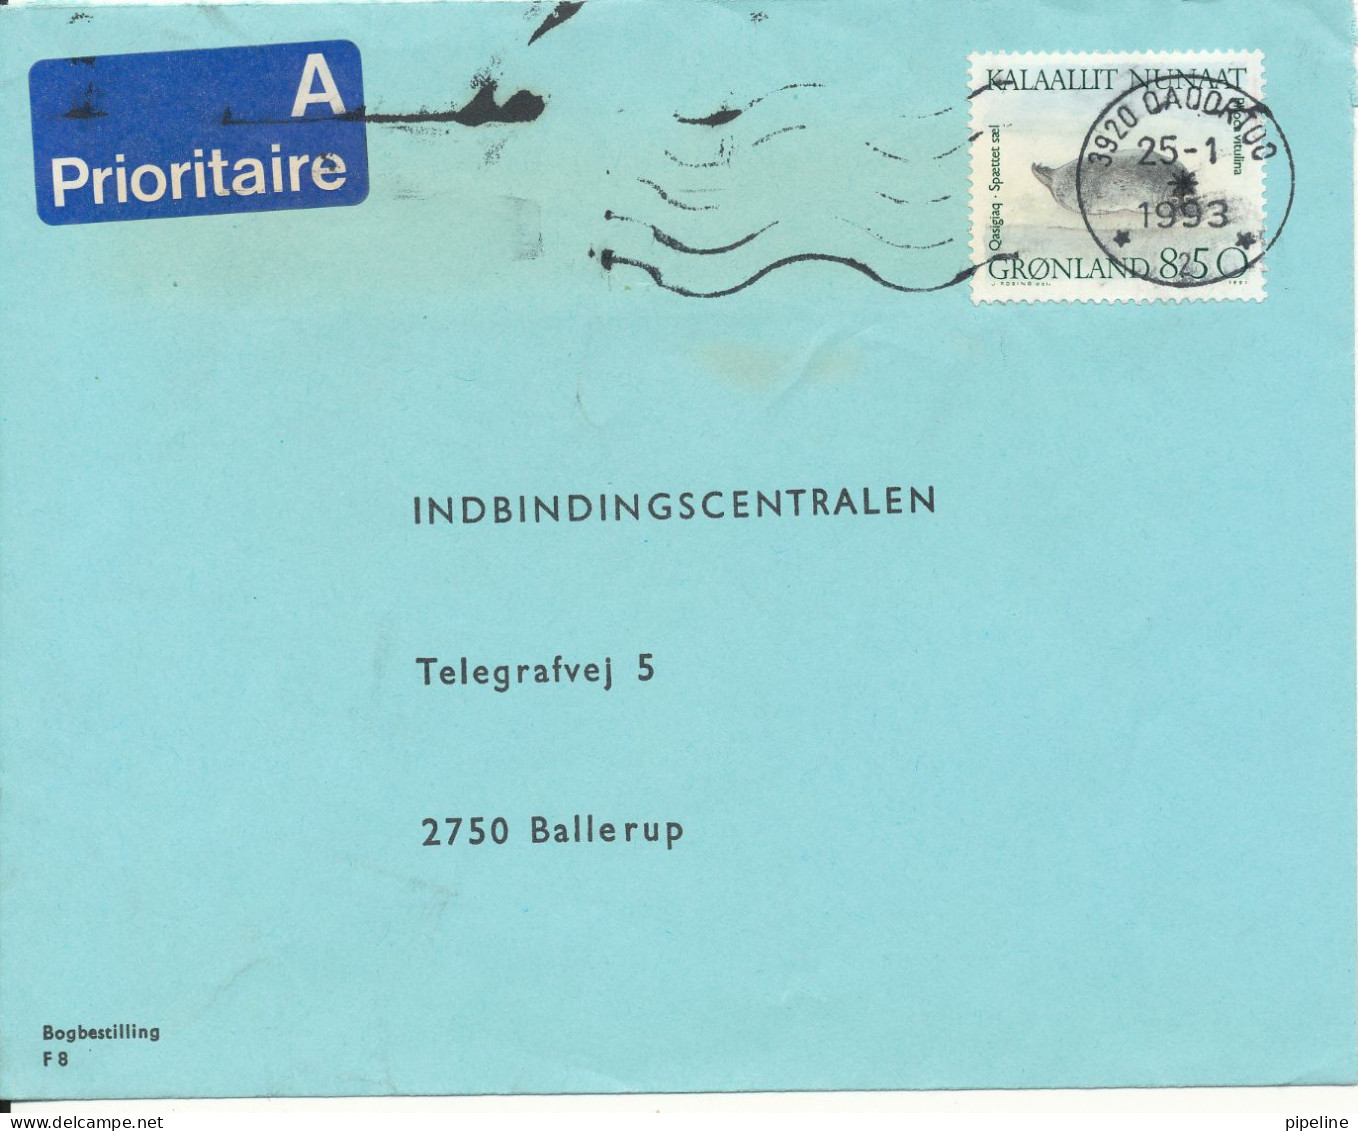 Greenland Cover Sent To Denmark 25-1-1993 Single Franked The Flap On The Backside Of The Cover Is Missing - Covers & Documents